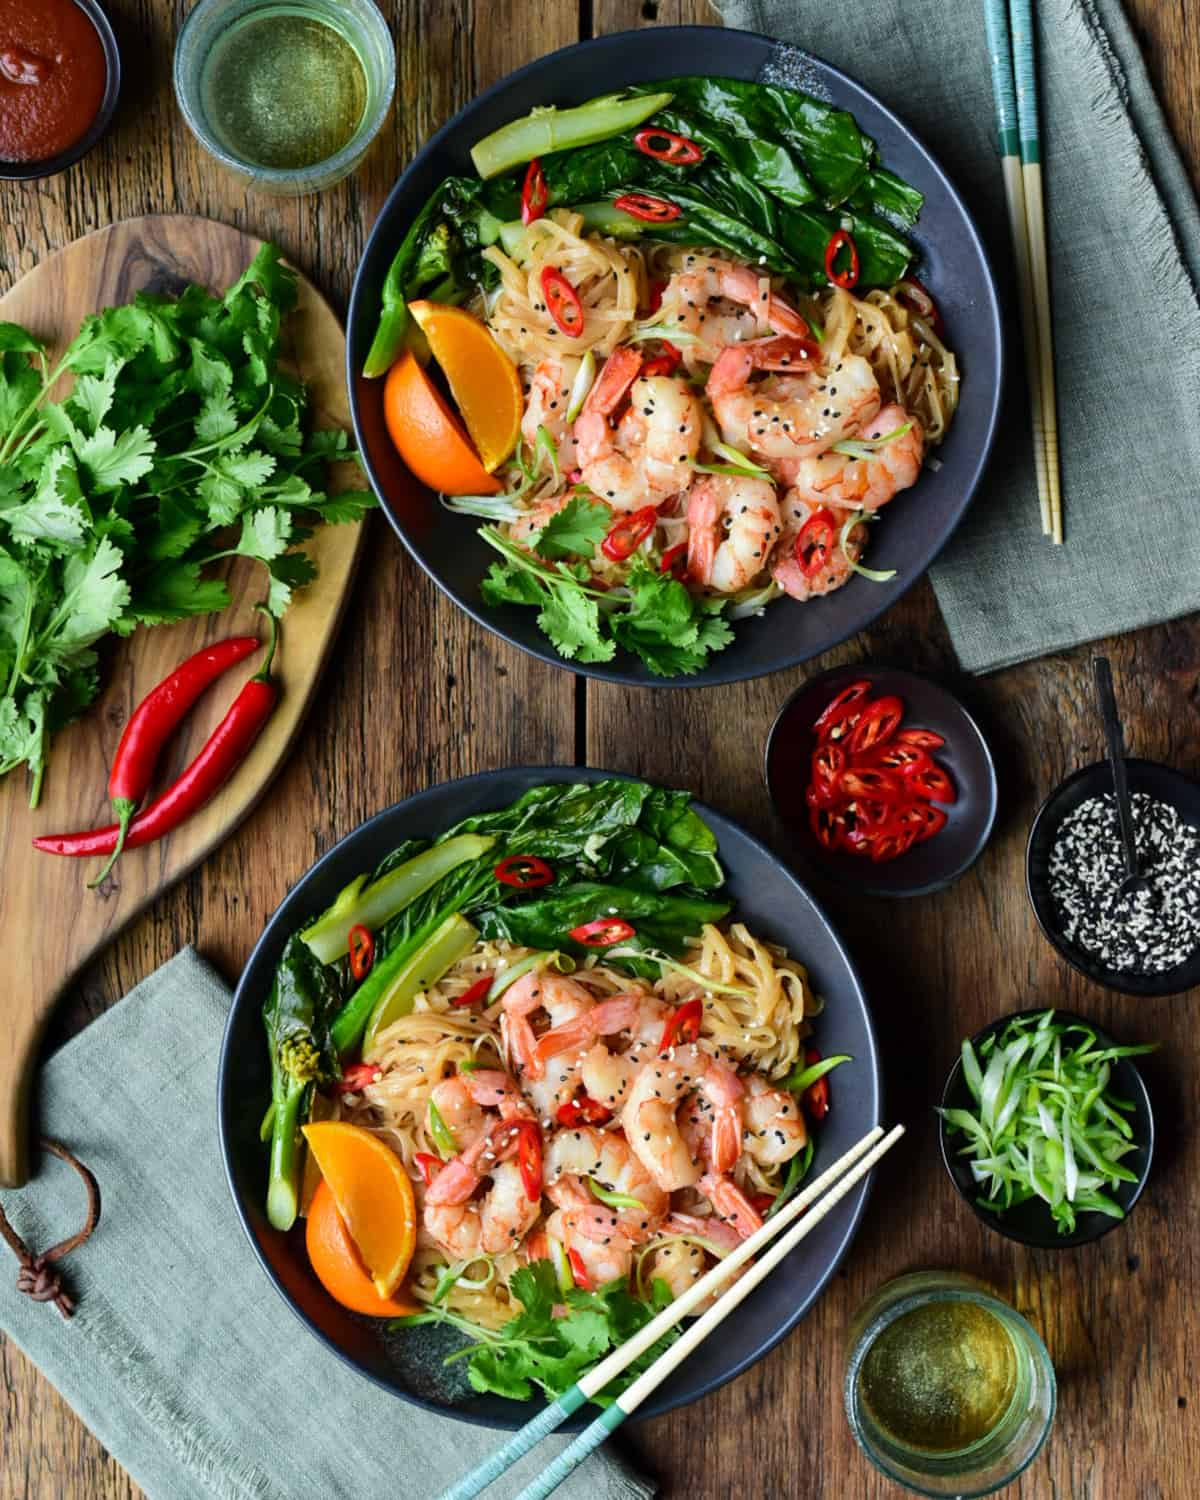 Two Spicy Shrimp Noodle Bowls served with Chinese broccoli and Minneola orange wedges.